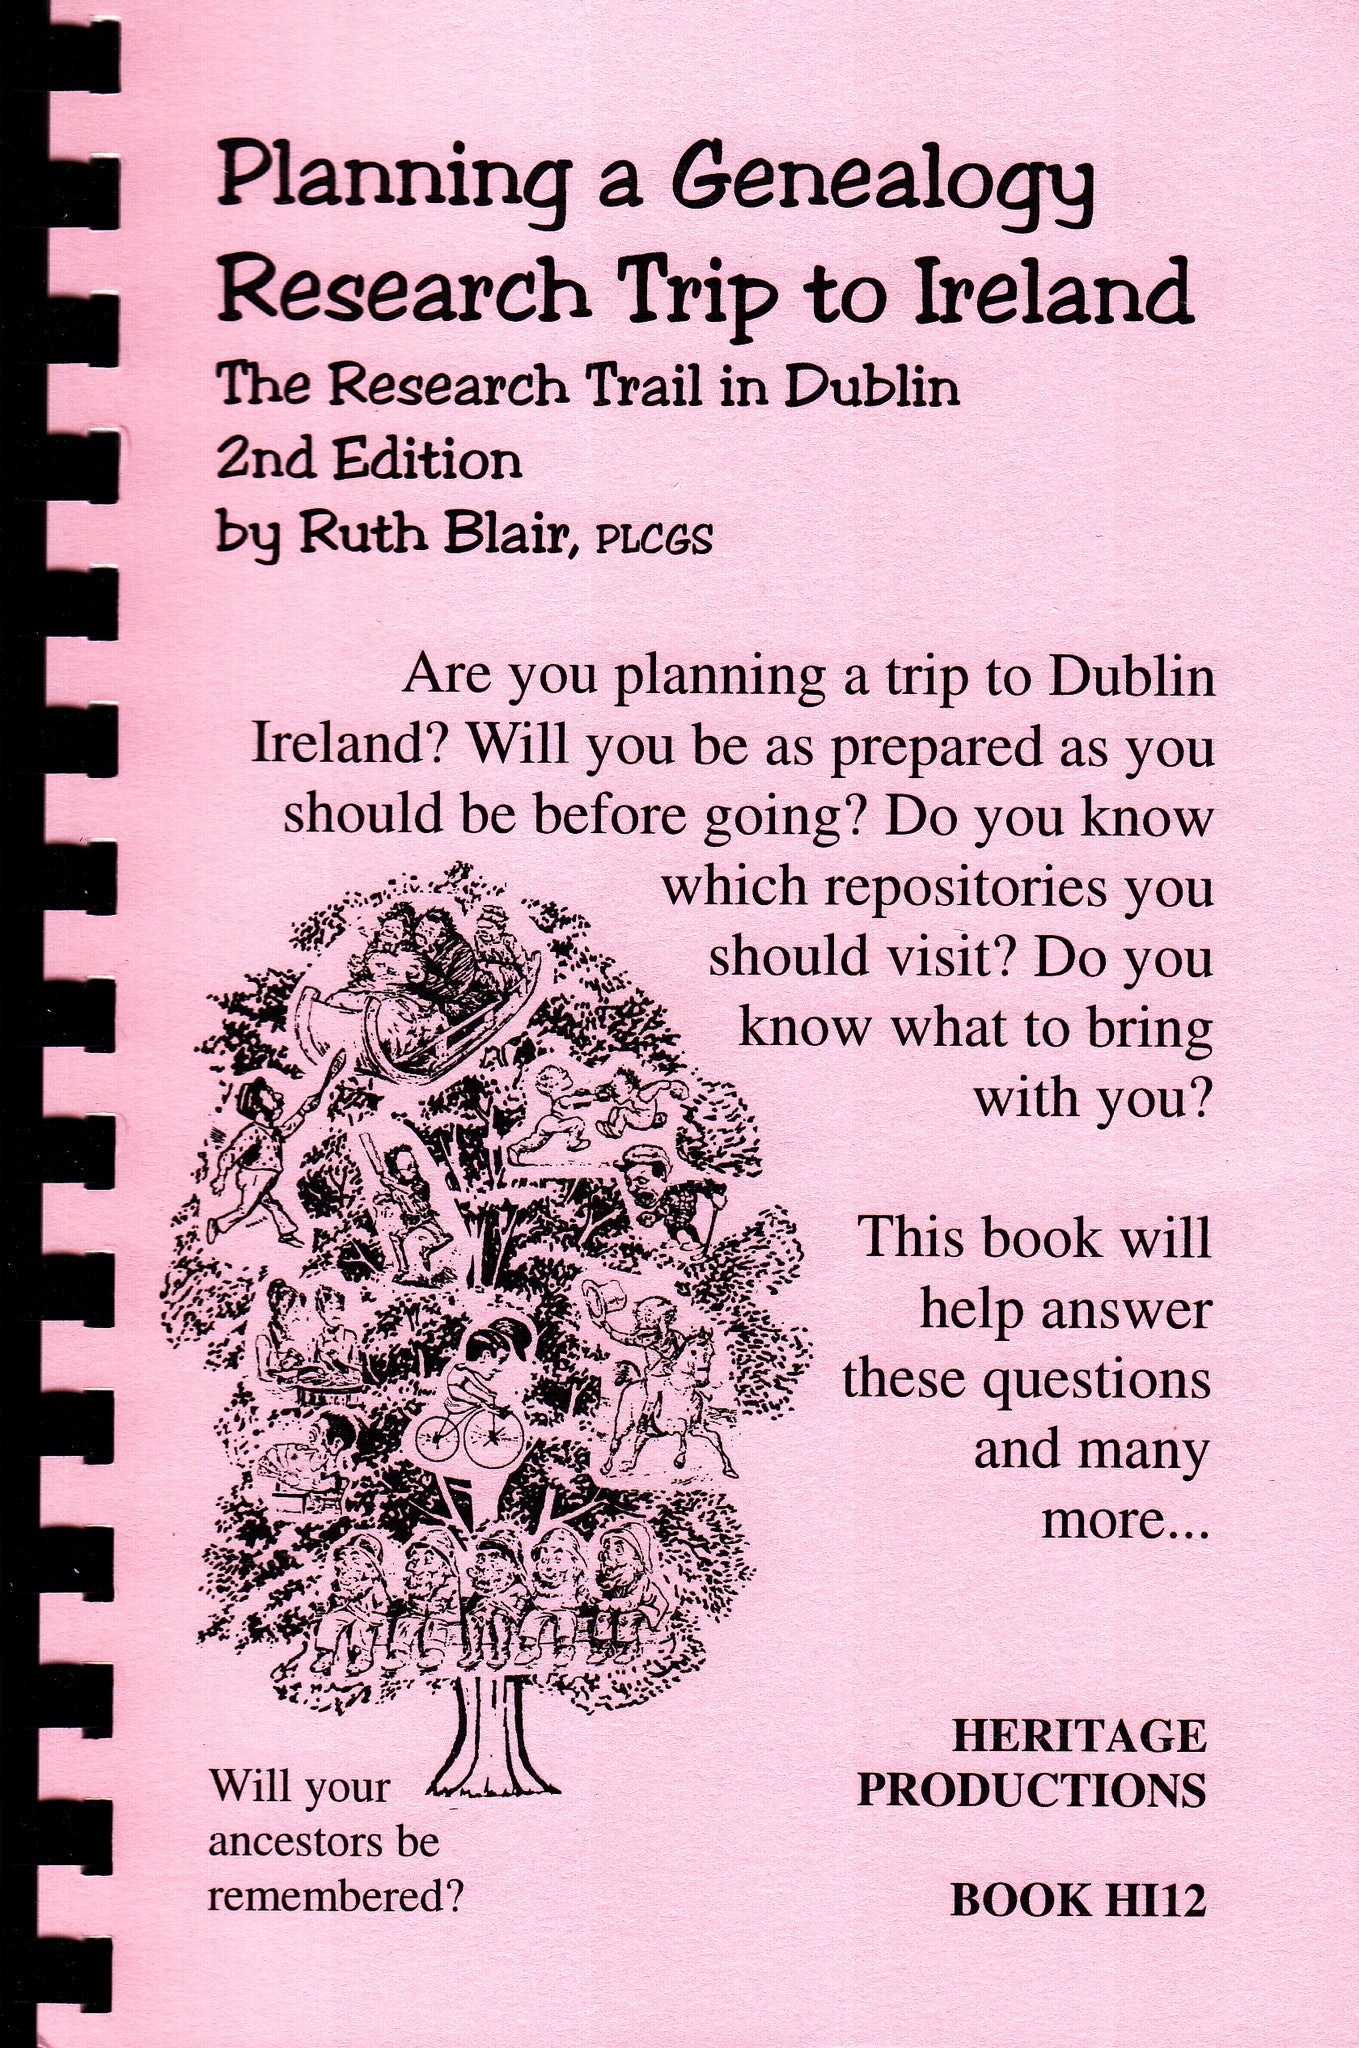 Planning a Genealogy Research Trip To Ireland: The Research Trail in Dublin